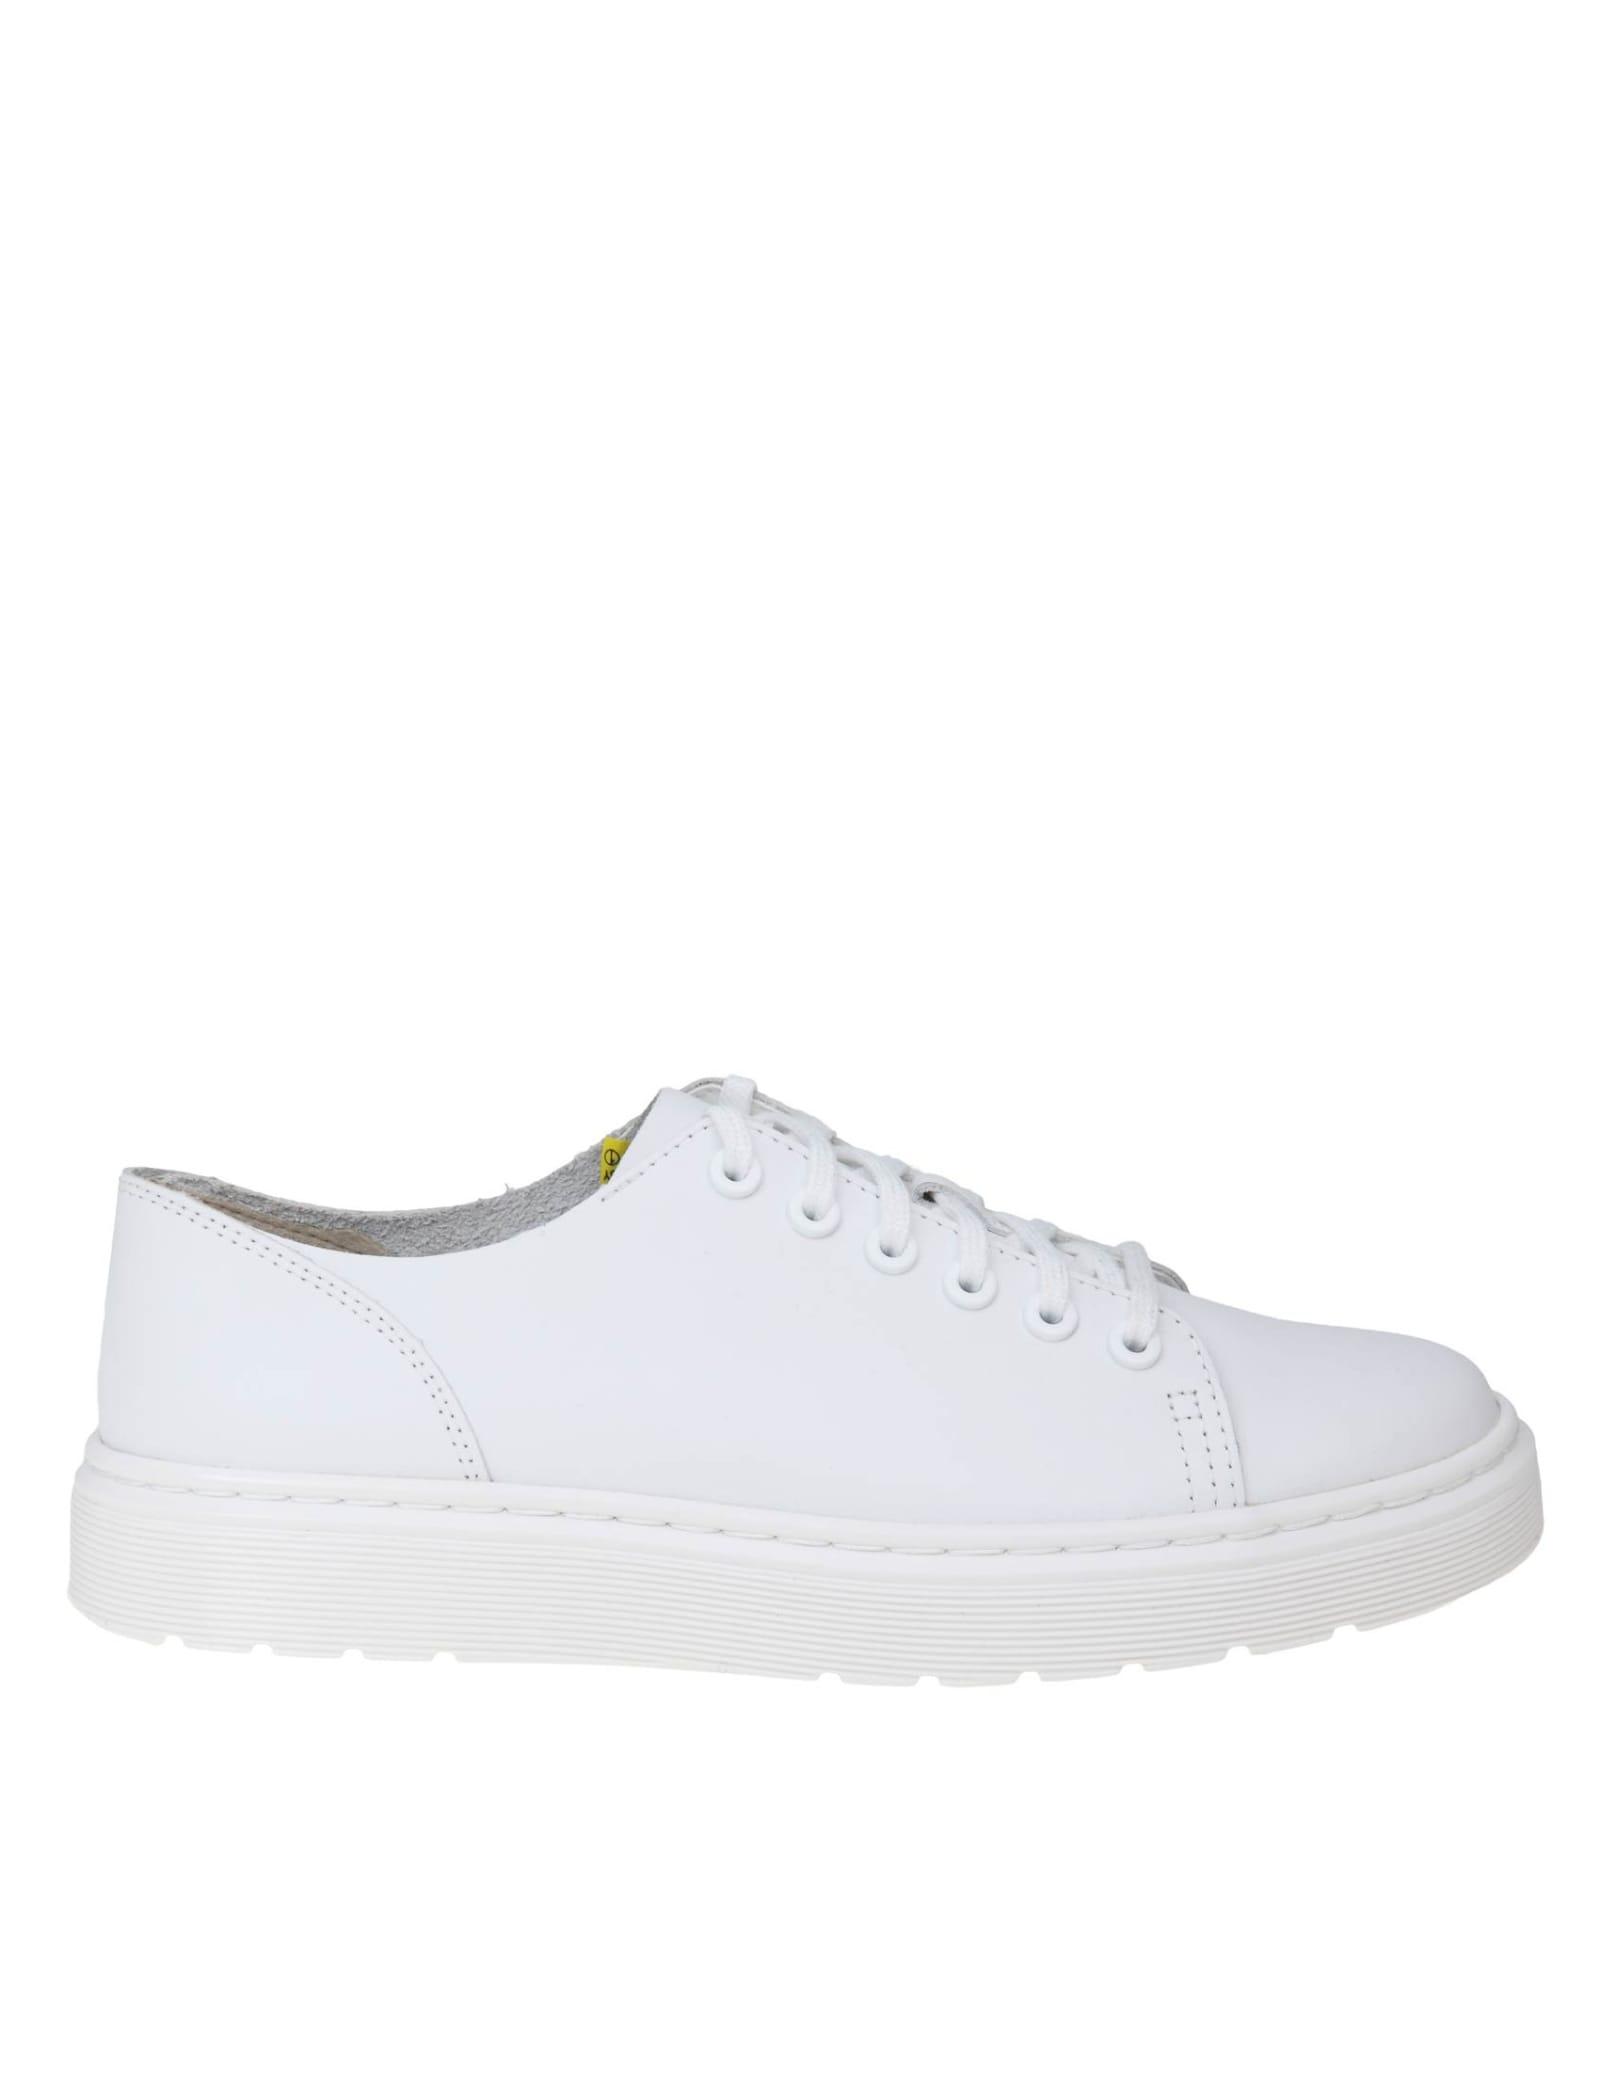 Dr. Martens Dr.martens Dante Sneakers In Leather Color White for Men | Lyst